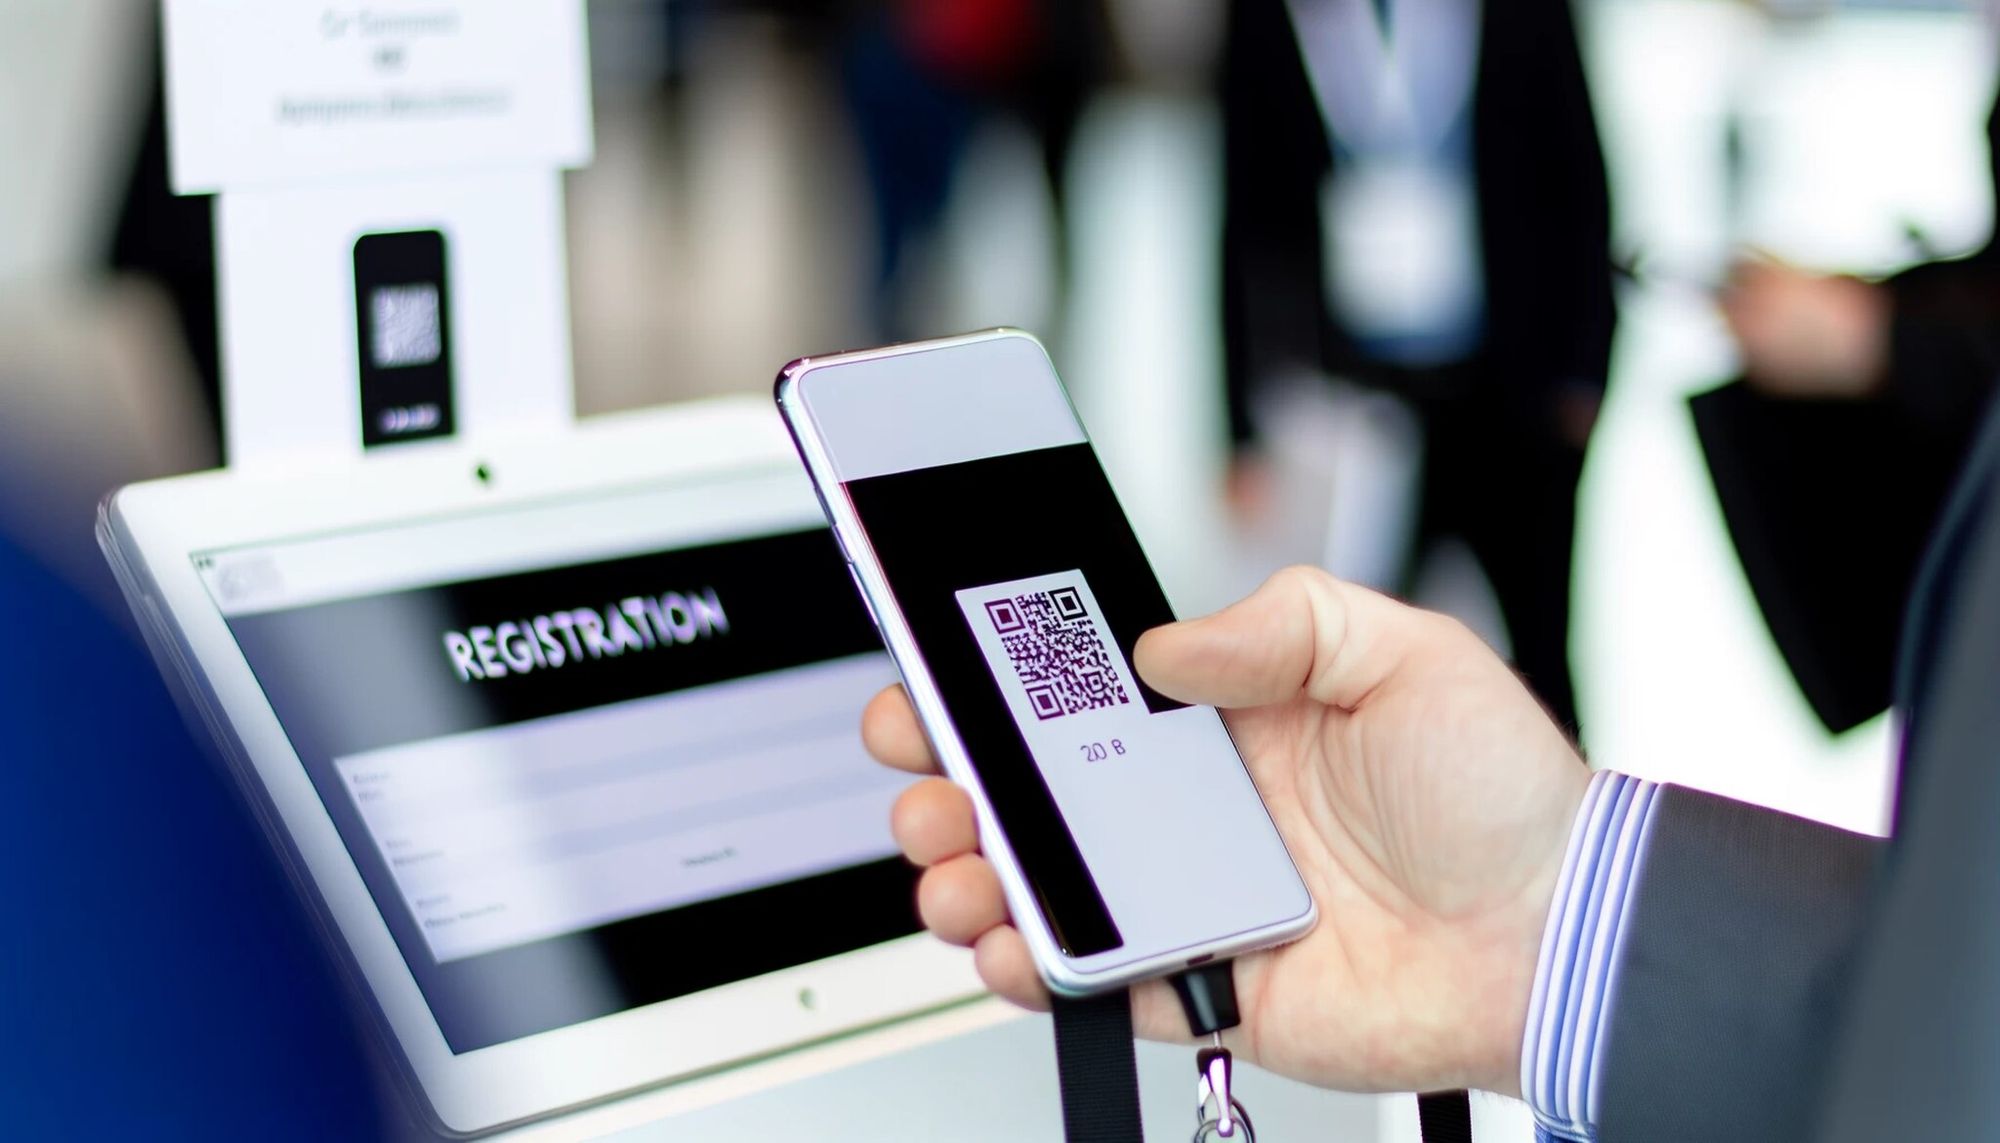  A close-up view of a person's hand holding a smartphone, and scanning a QR code for registration 